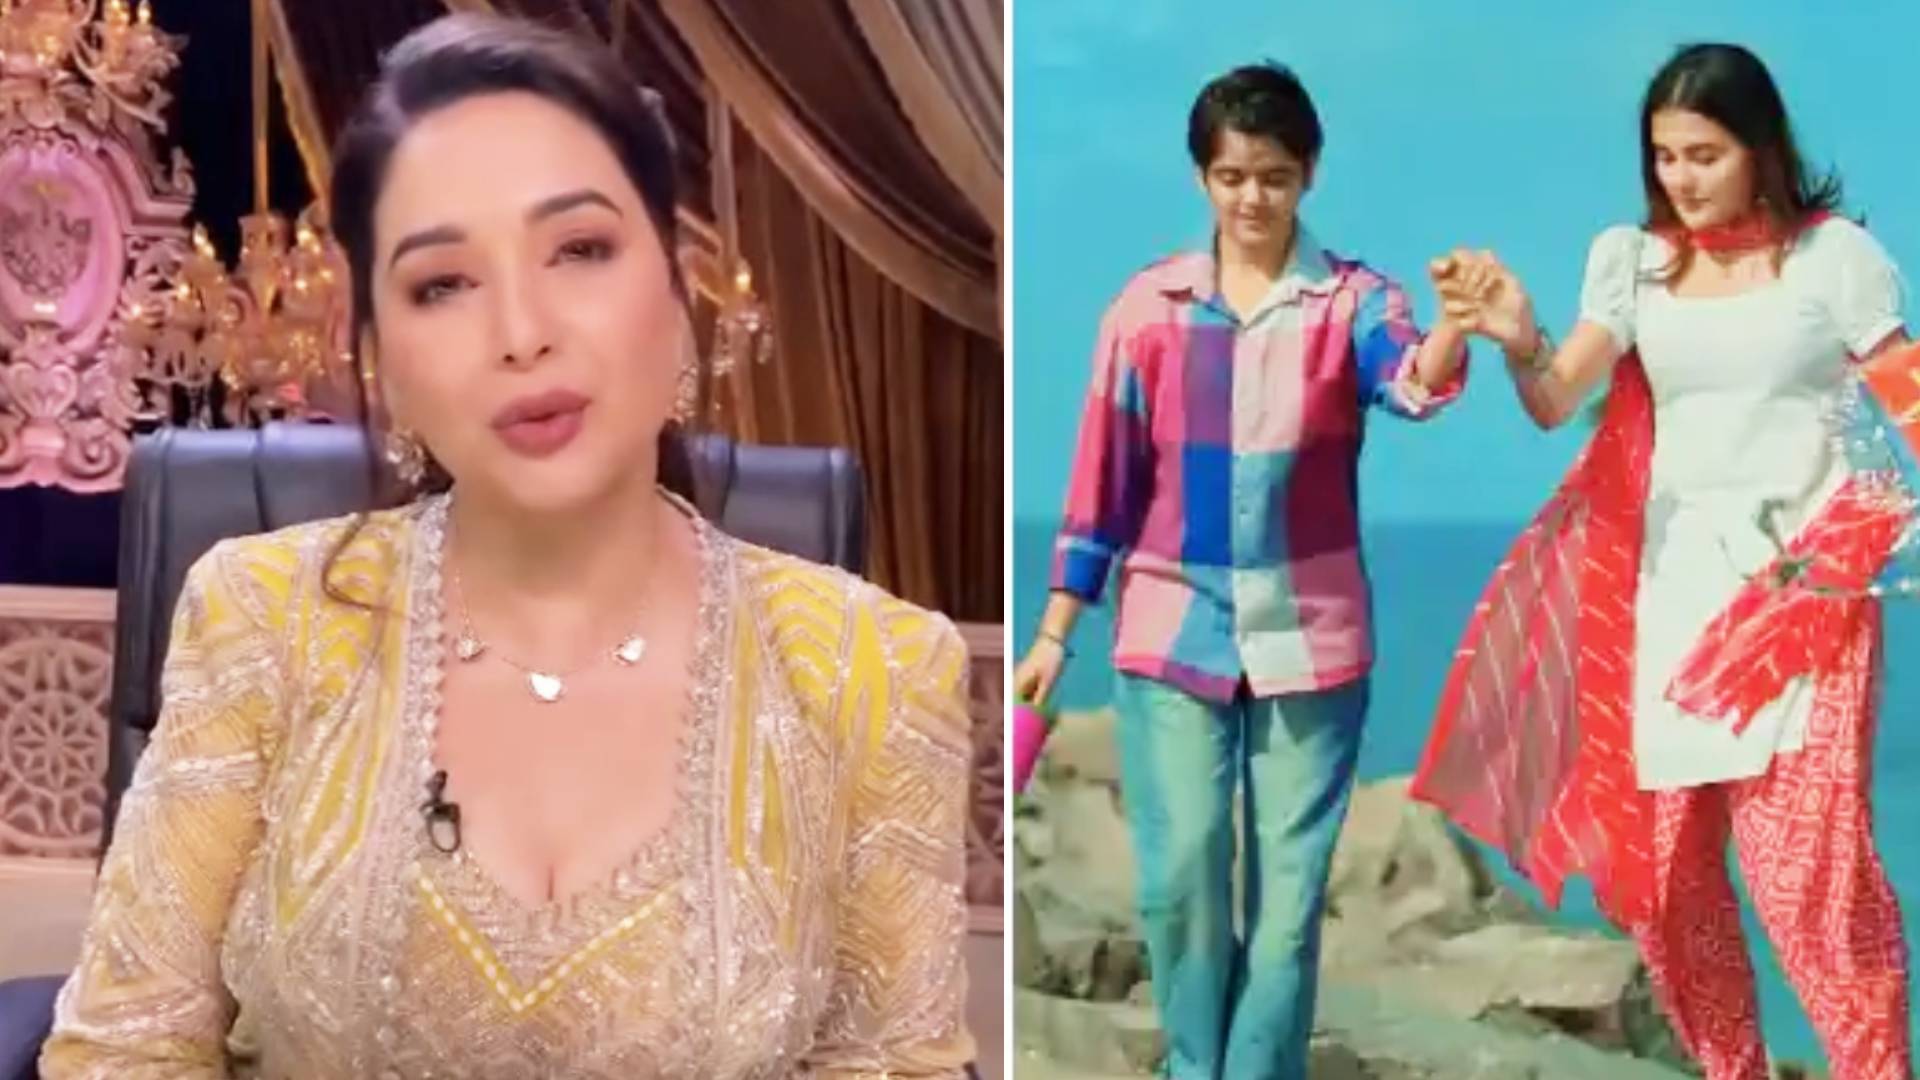 Moved by COLORS’ ‘Krishna Mohini’, ‘Dance Deewane’ judge Madhuri Dixit Nene opens up about her saarthi